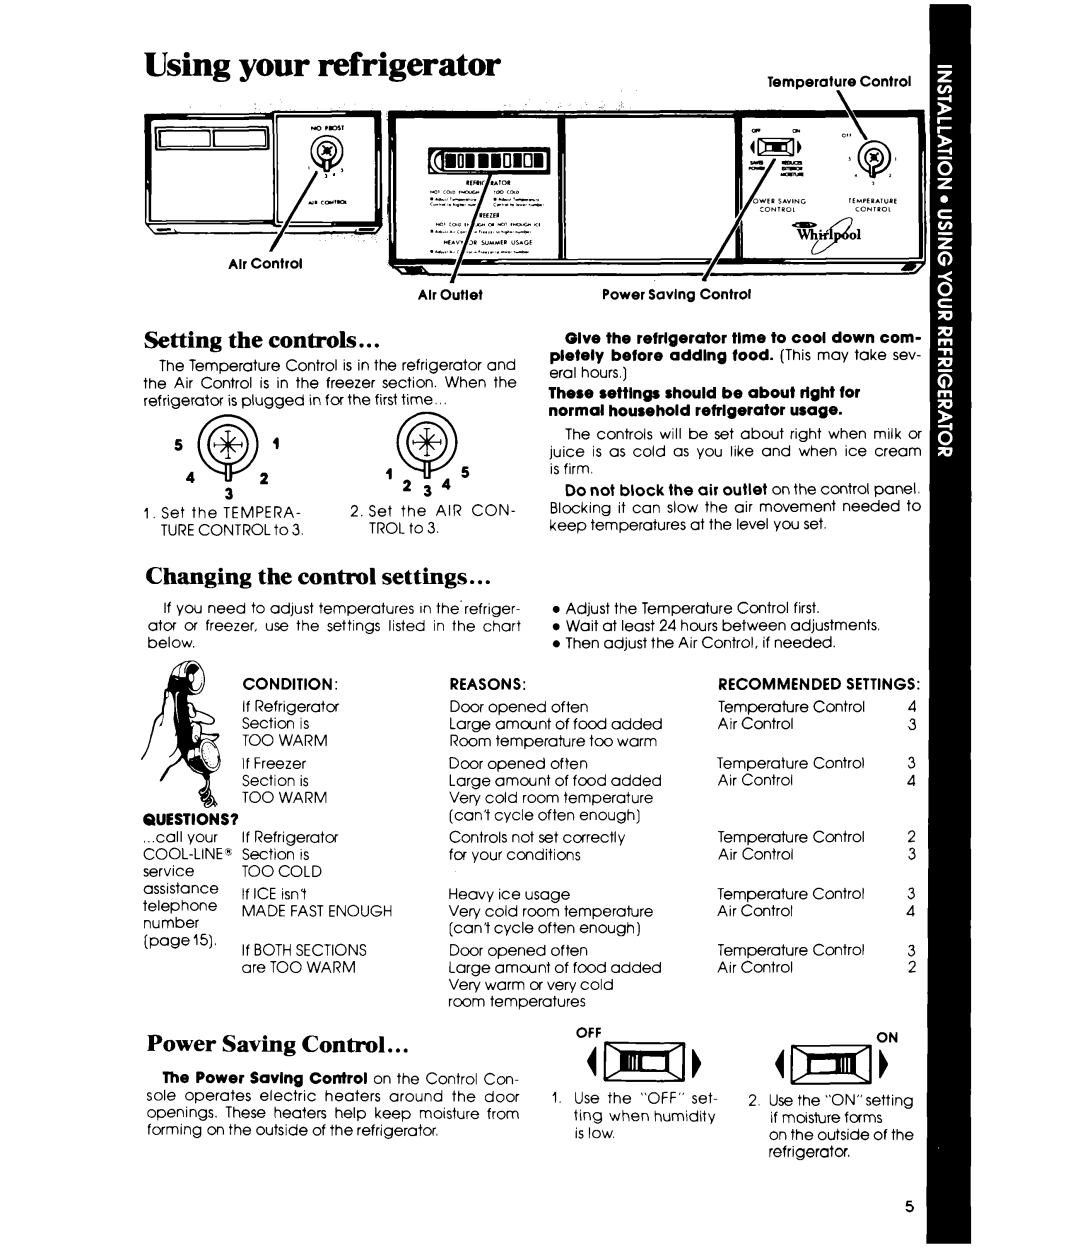 Whirlpool EDl9VK Using your refrigerator, Setting the controls, Changing the control settings, Power Saving Control, 54@2’ 